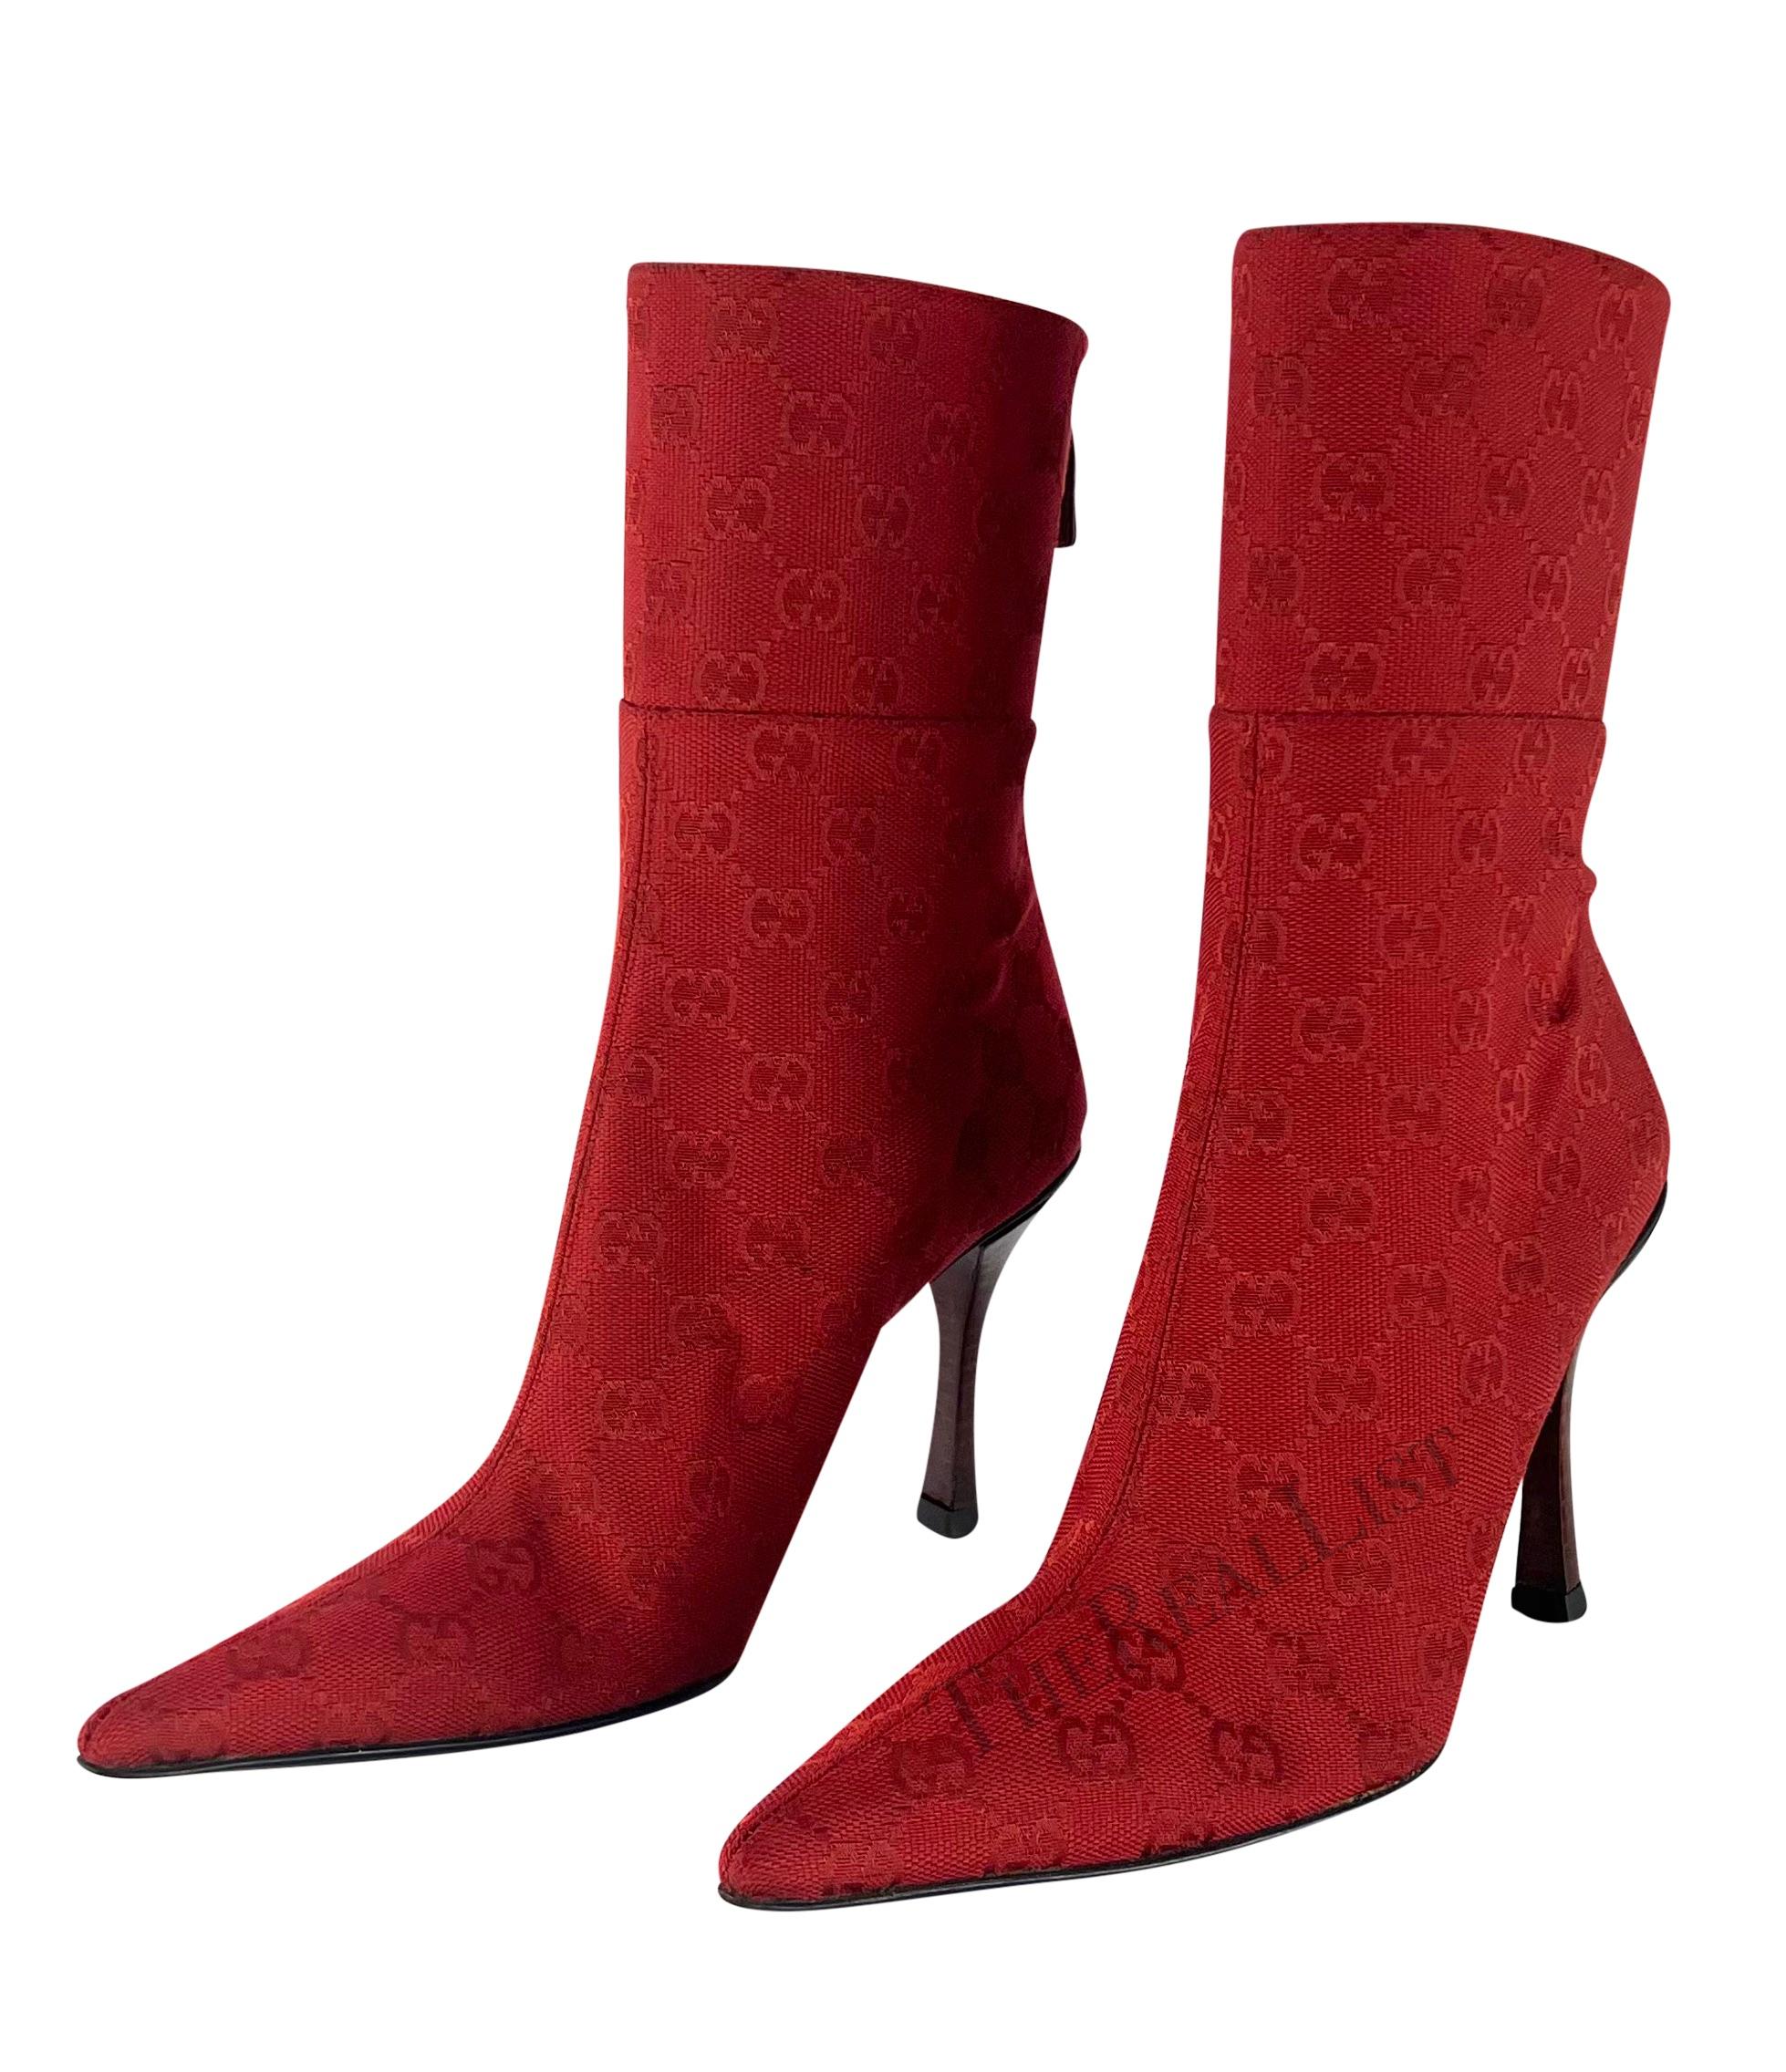 Women's Early 2000s Gucci by Tom Ford Red 'GG' Canvas Heel Ankle Boots Size 6B For Sale